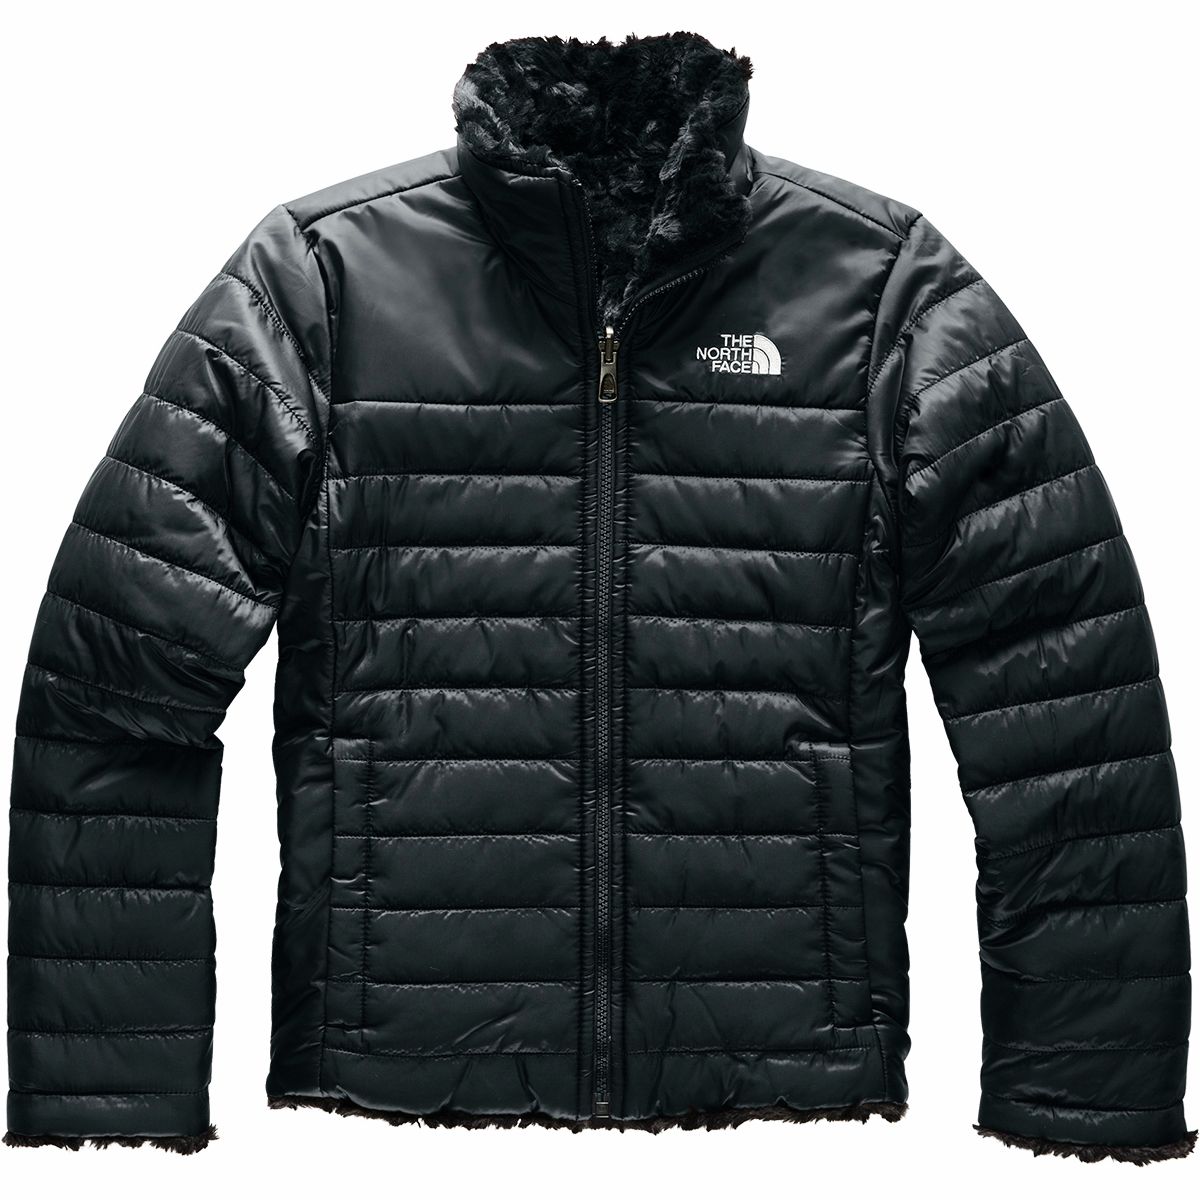 The North Face Mossbud Swirl Reversible Jacket - Girls' | Backcountry.com